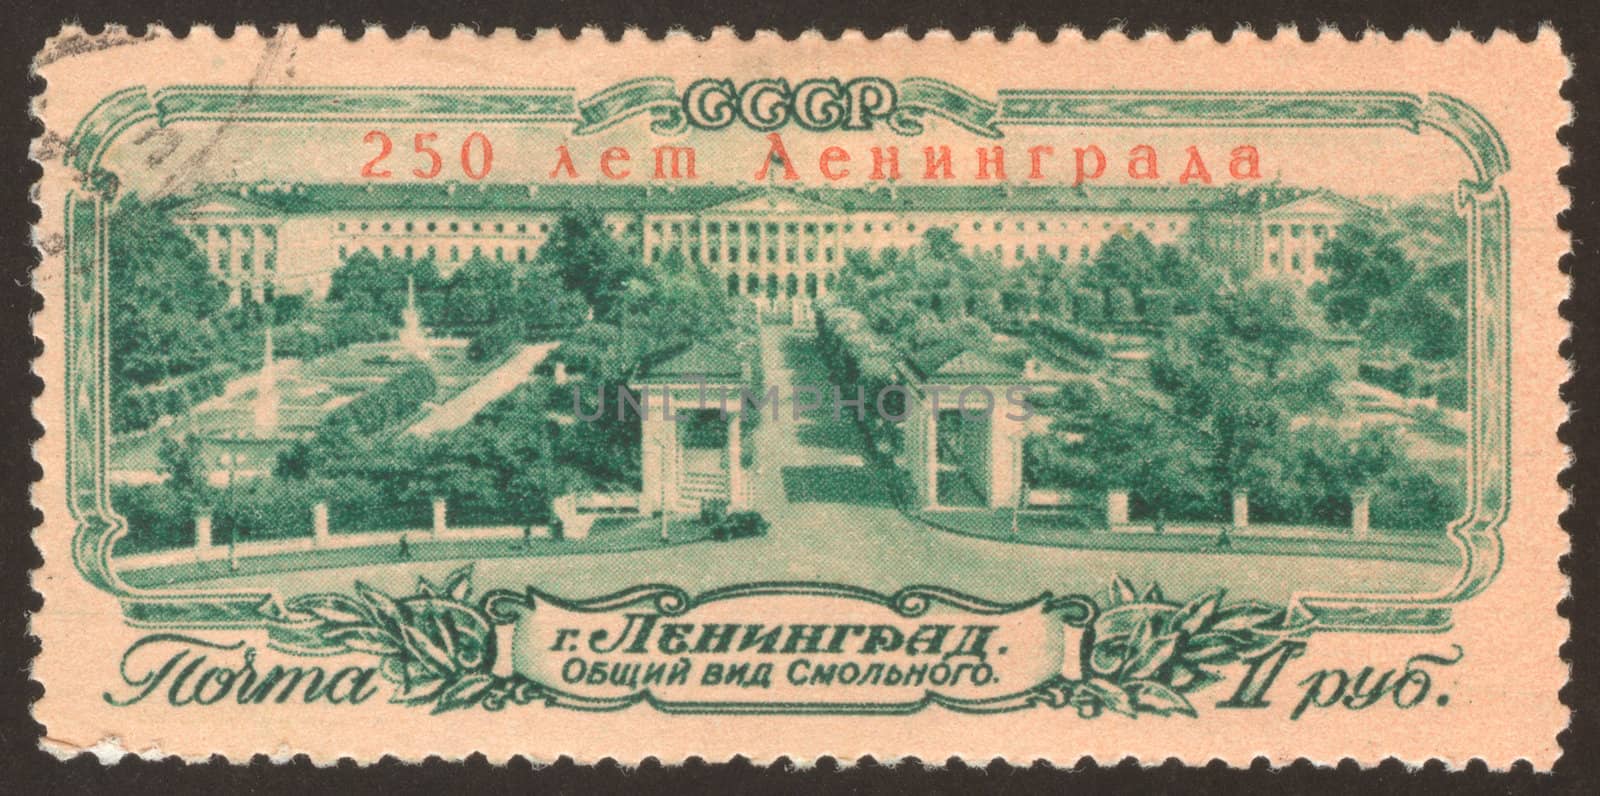 The scanned stamp. The Soviet stamp. The city of Leningrad (St.-Petersburg).